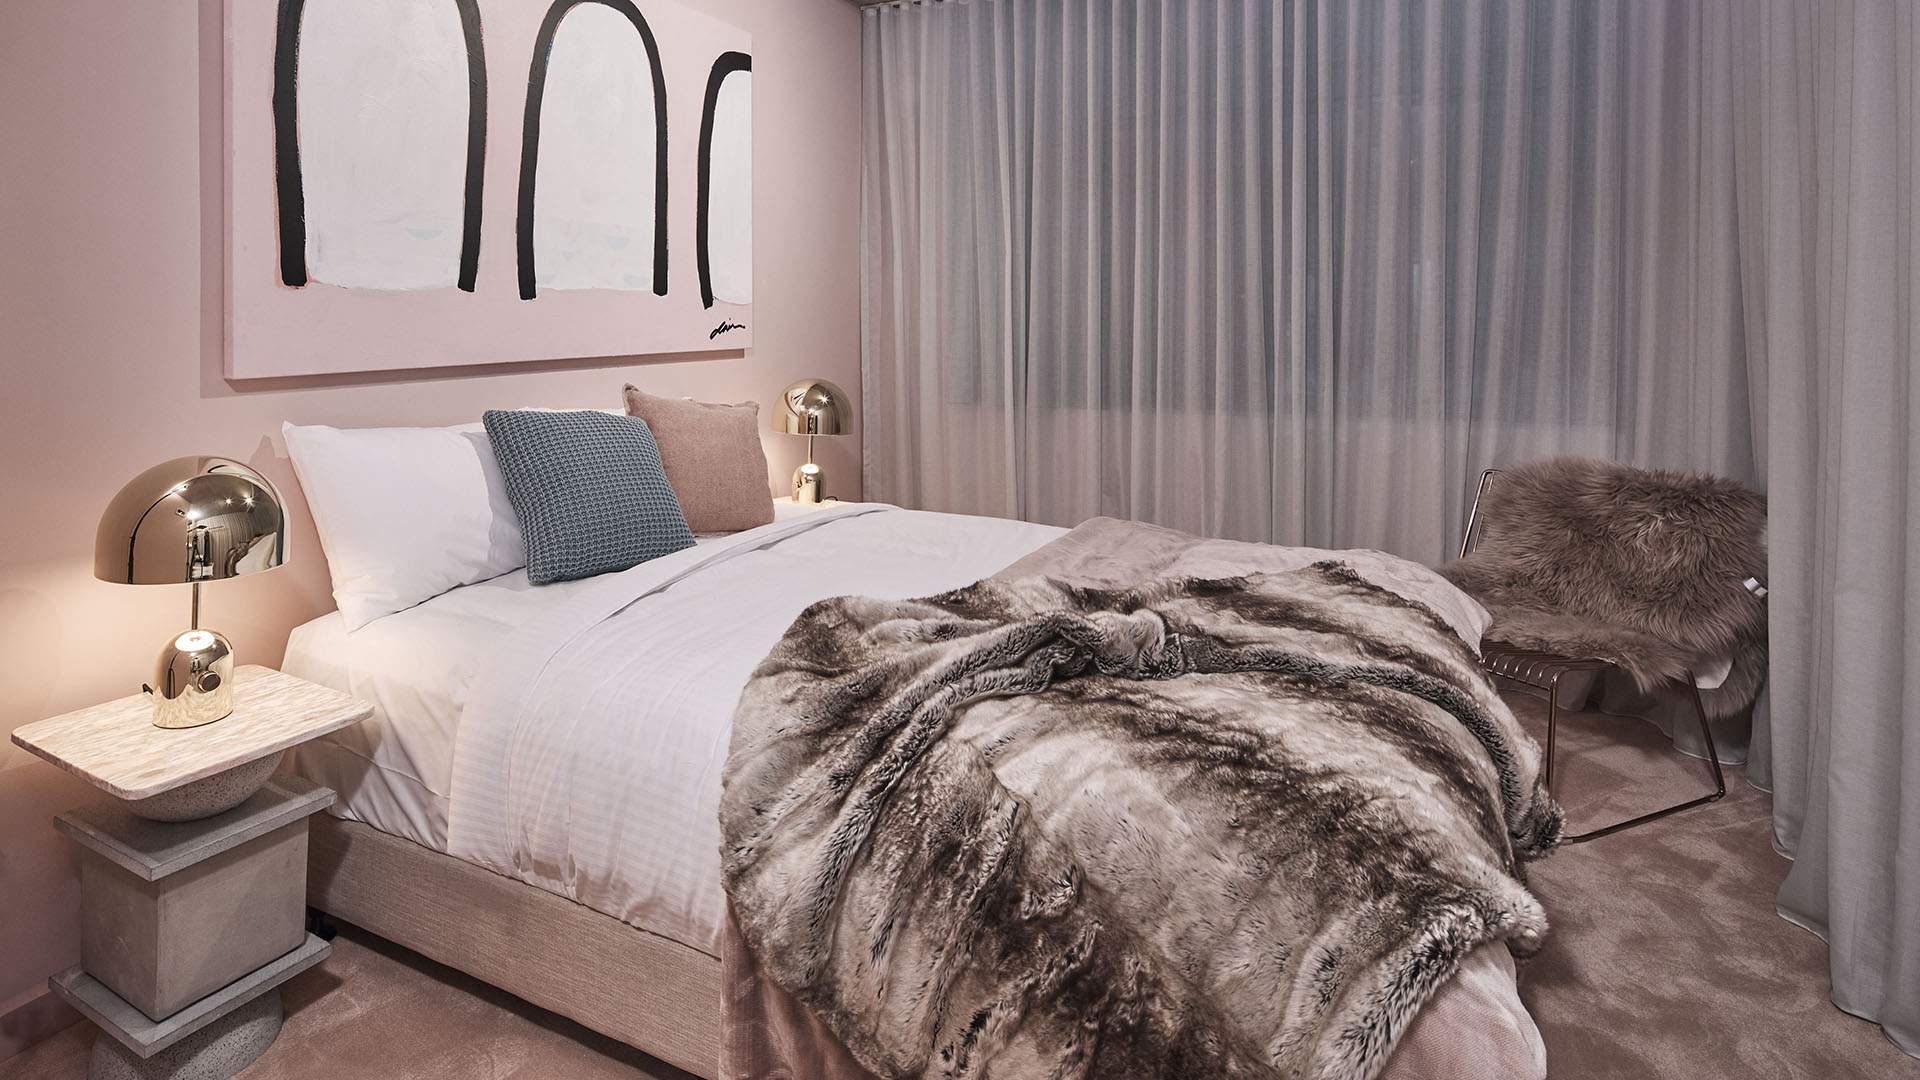 A Look Inside The Collectionist, the New Sydney Hotel Letting Guests Pick Their Own Designer Rooms